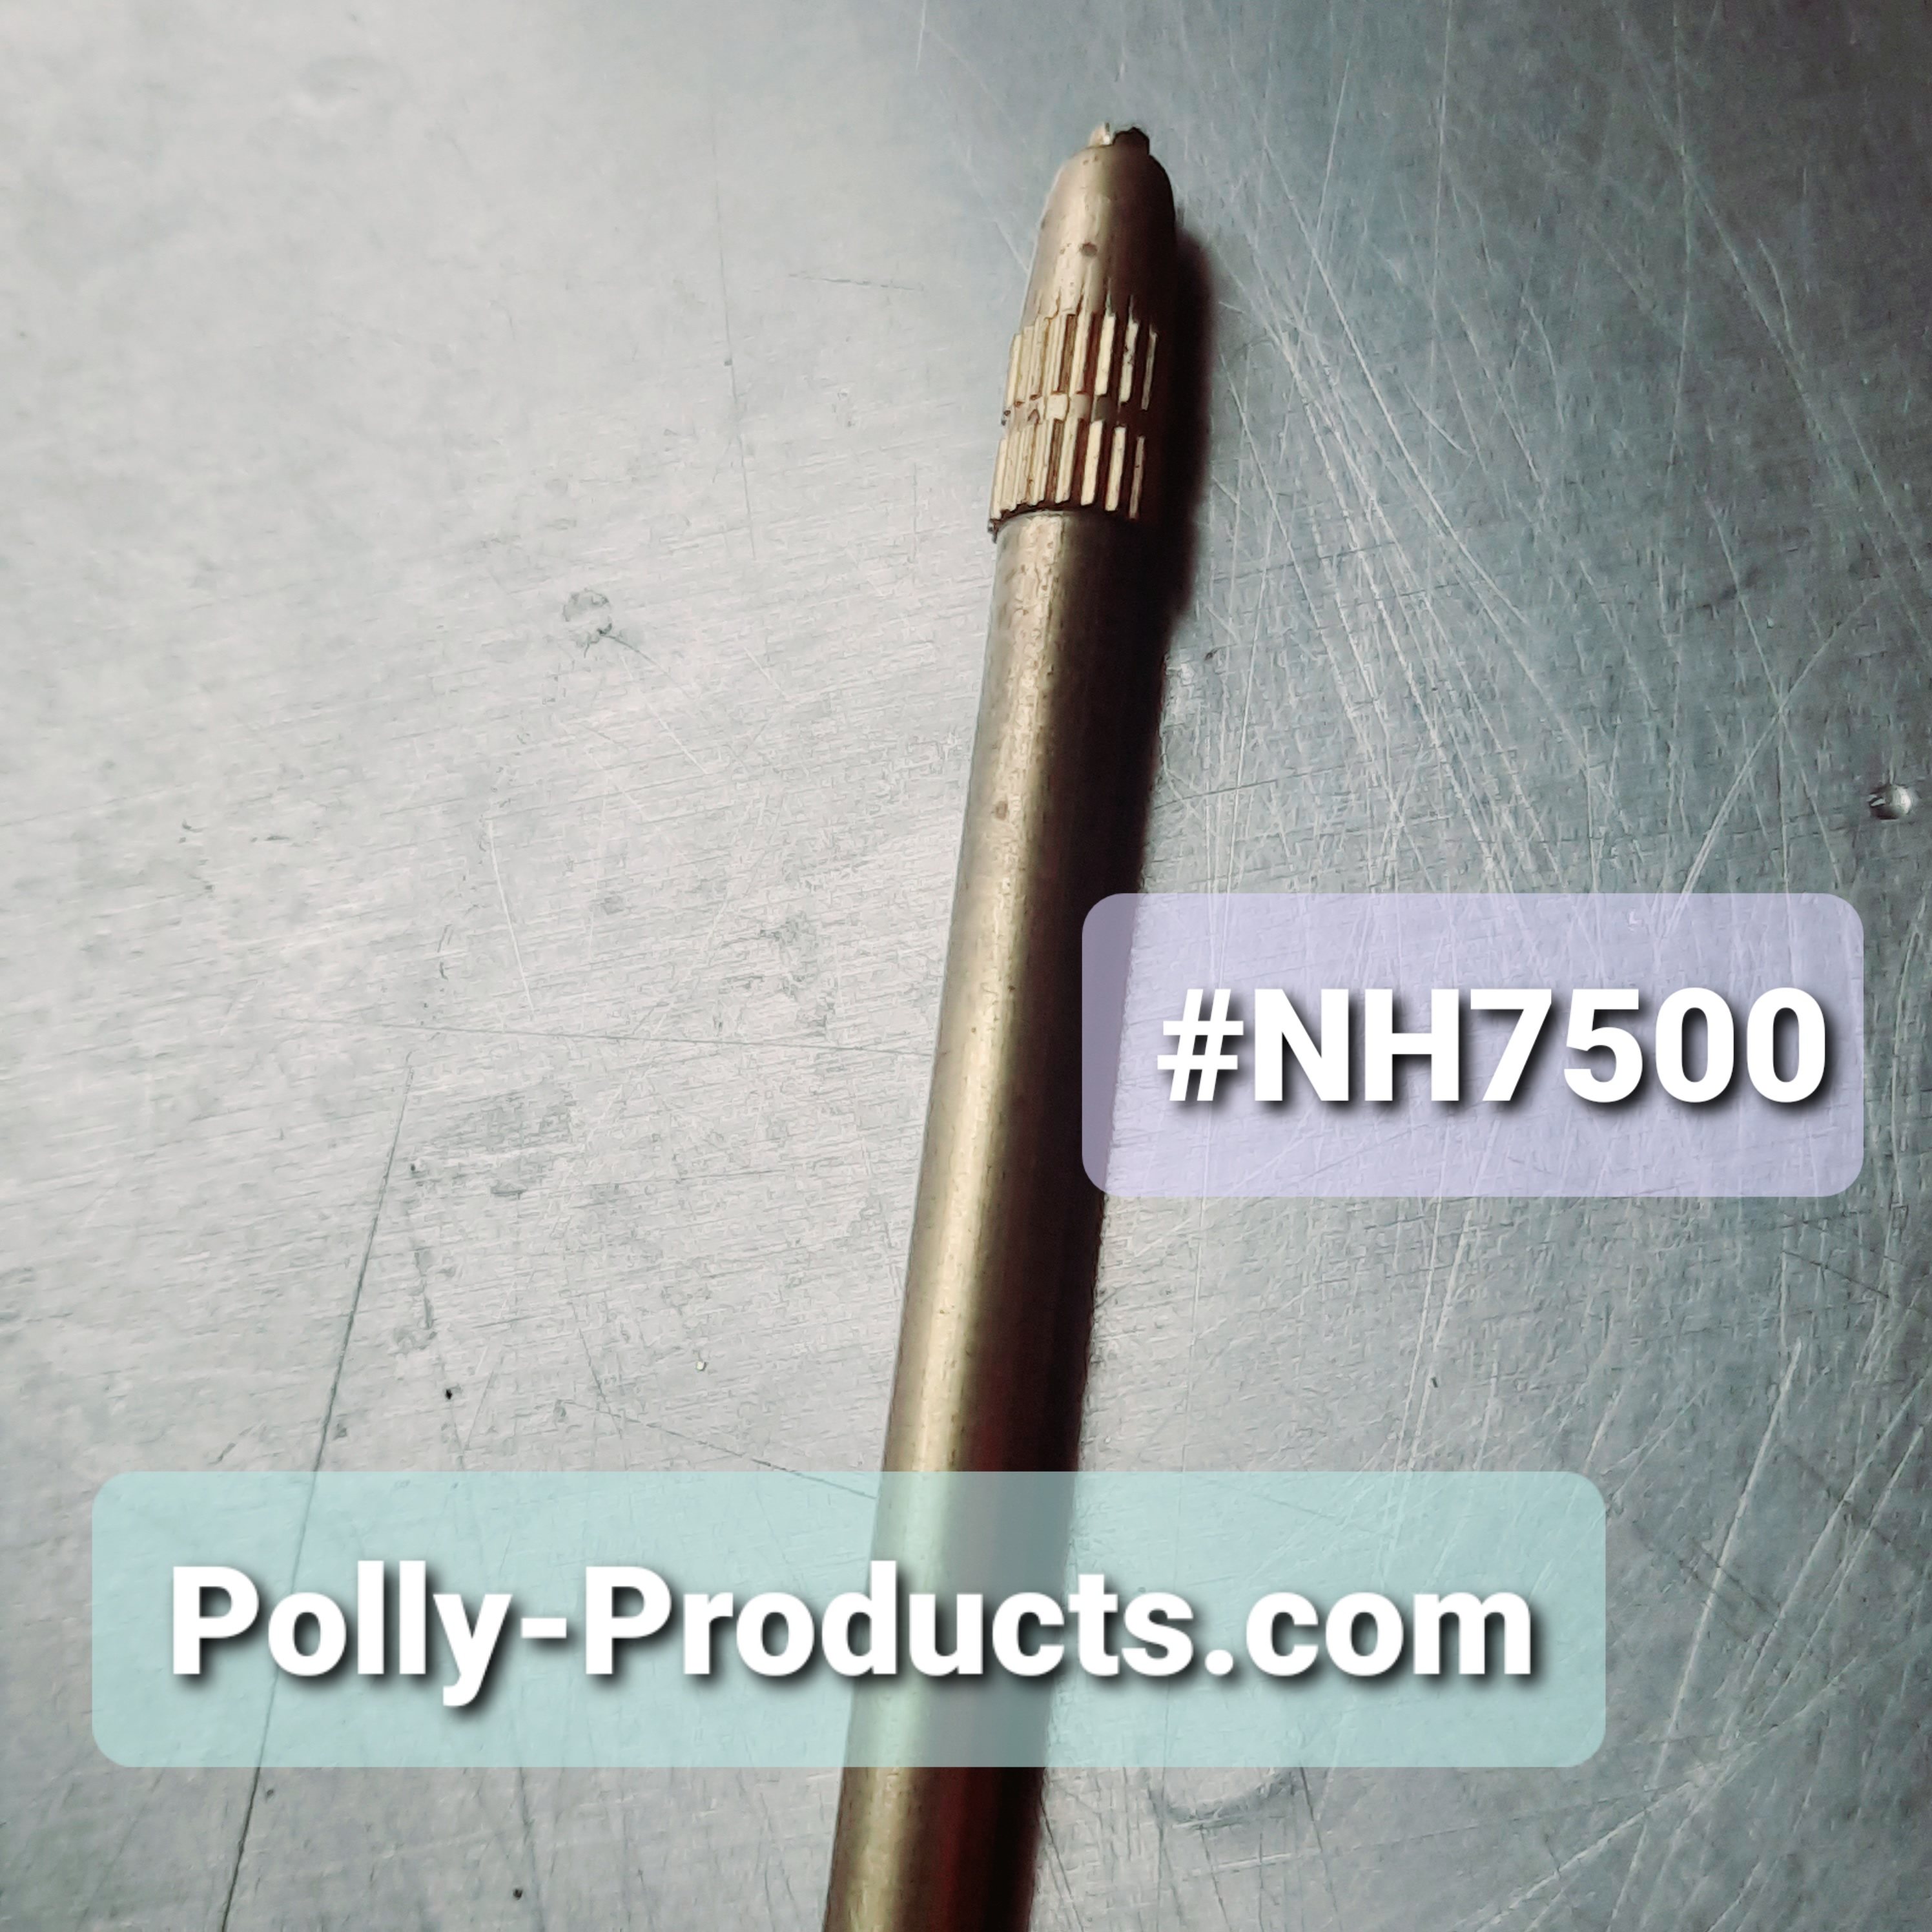 #NH7500 POLLY PRODUCTS 5"L HAIR SYSTEM VENTILATING NEEDLE 